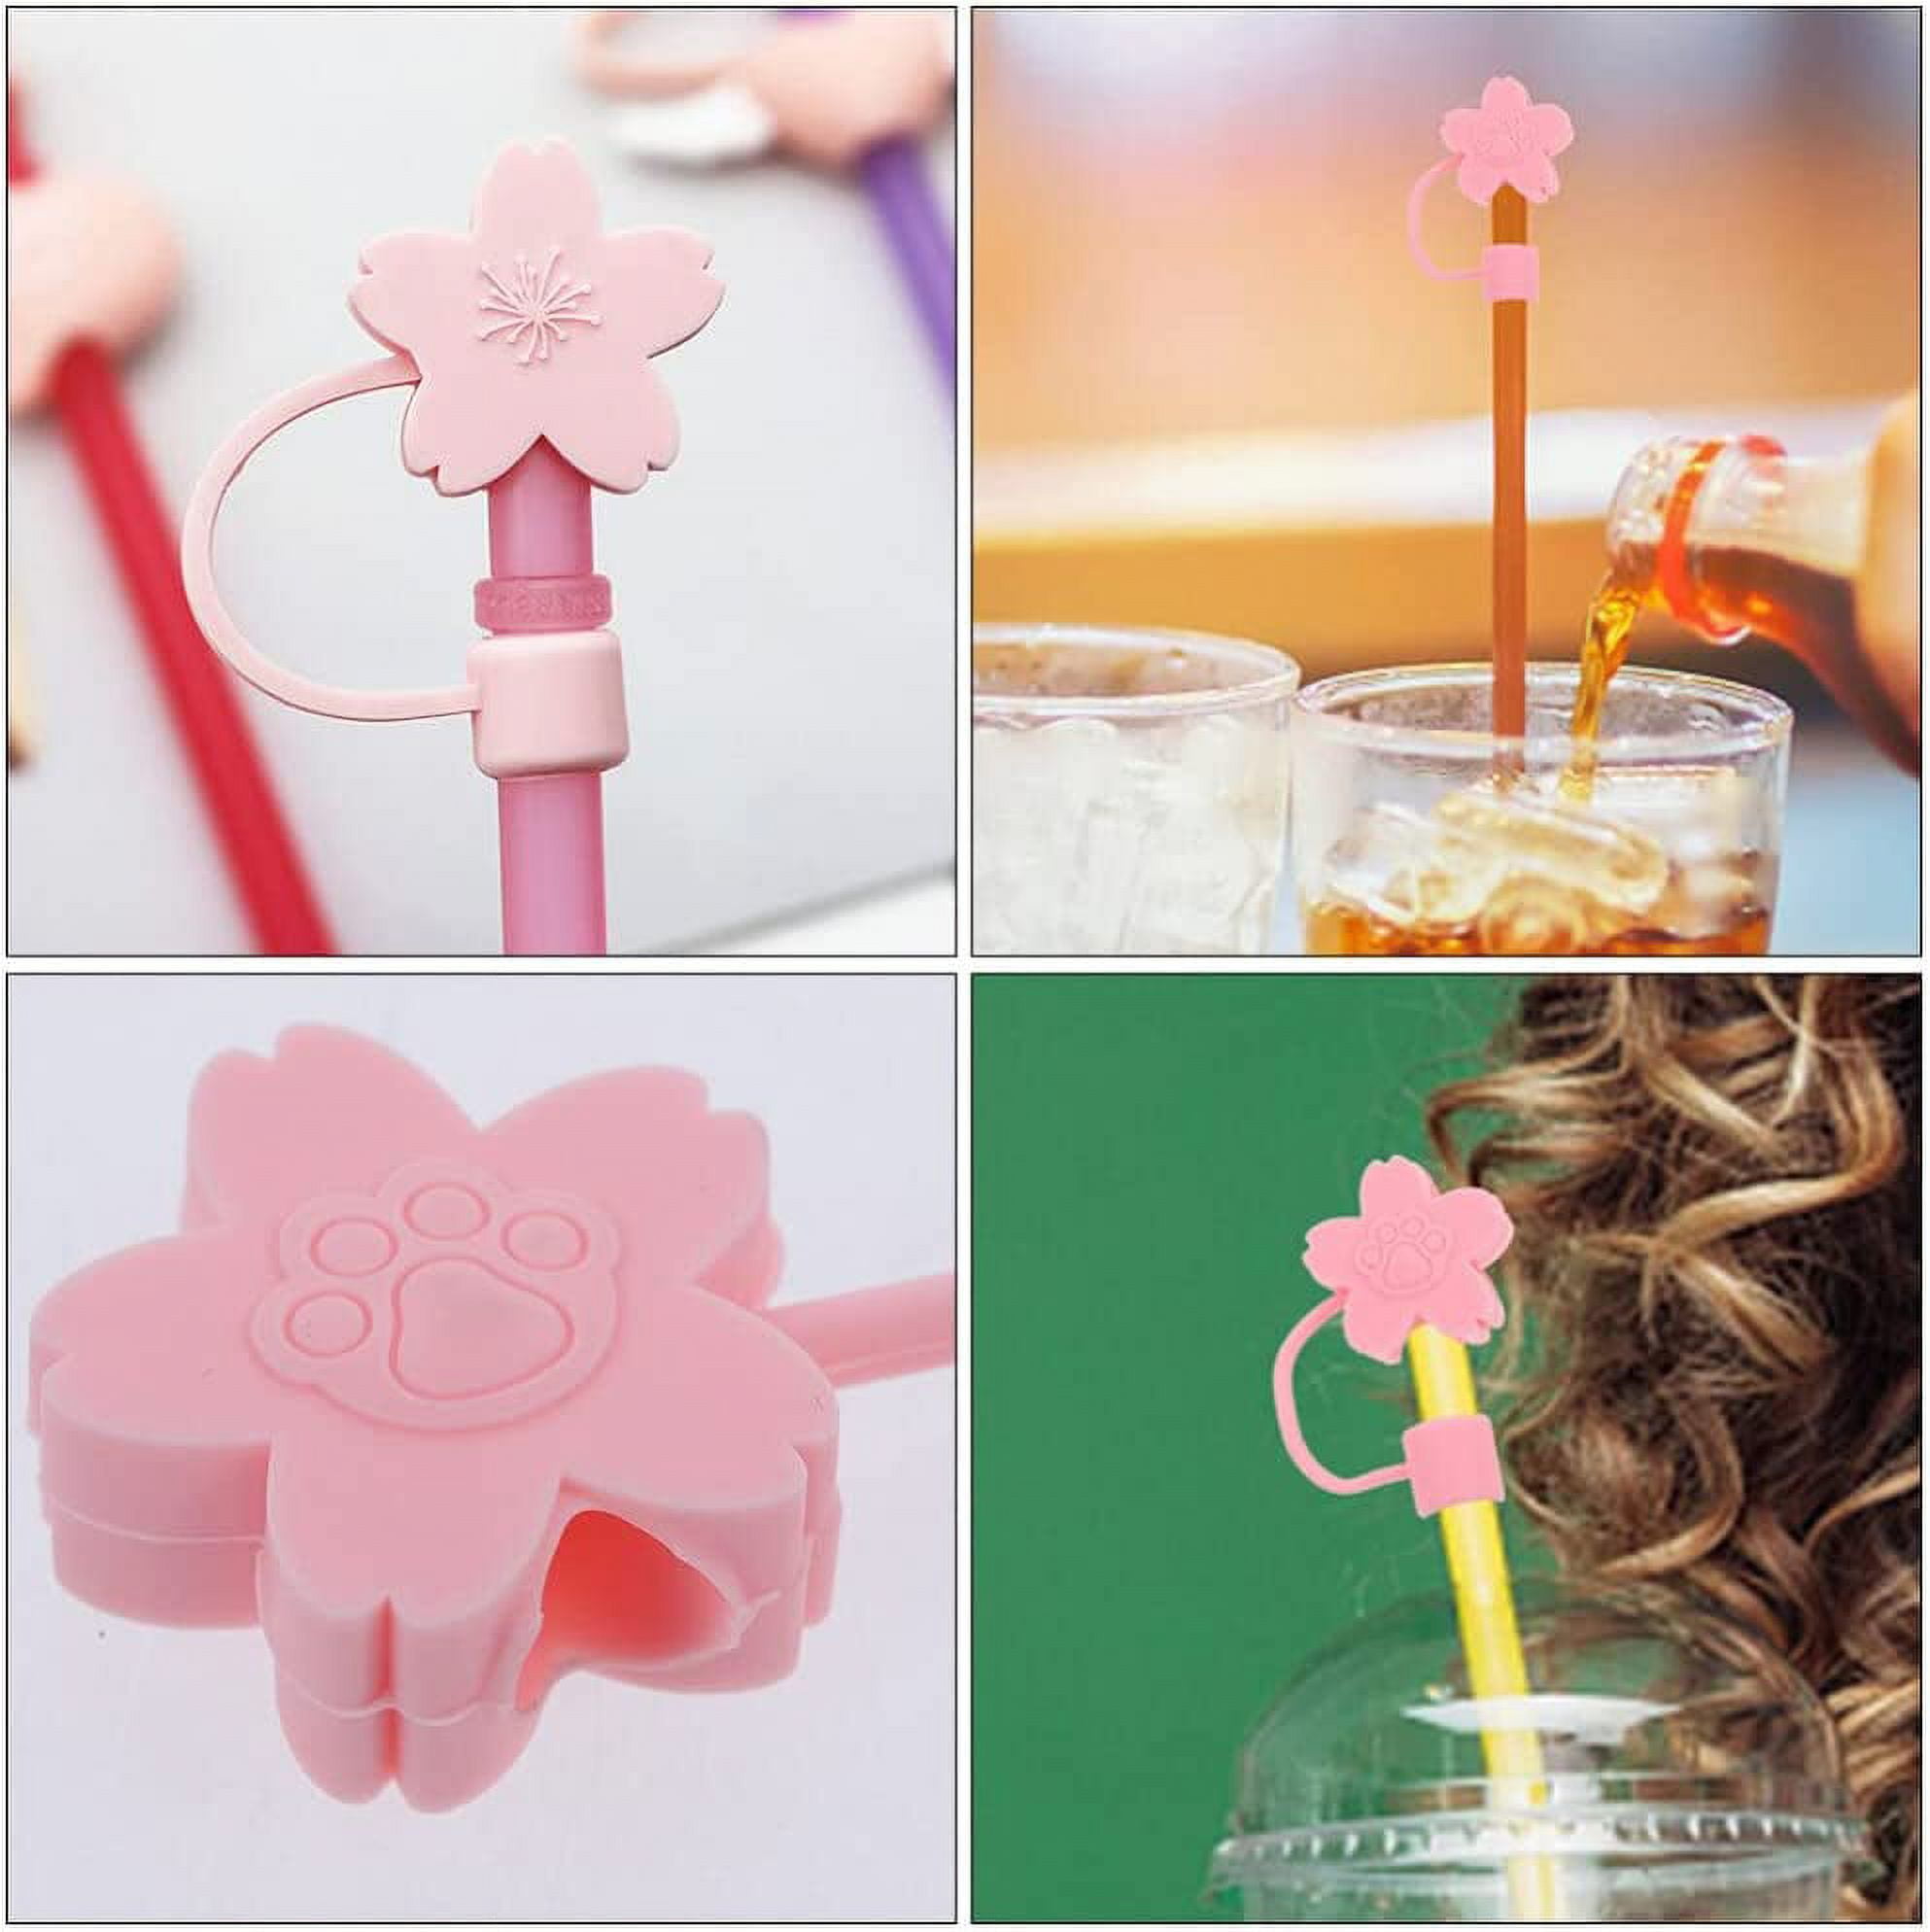 9Pcs Pink Straw Covers Cap Aesthetic Straw Cover for Girls Women Silicone  Drinking Straw Topper Reusable Portable Dust Proof Plugs Cap Protector for